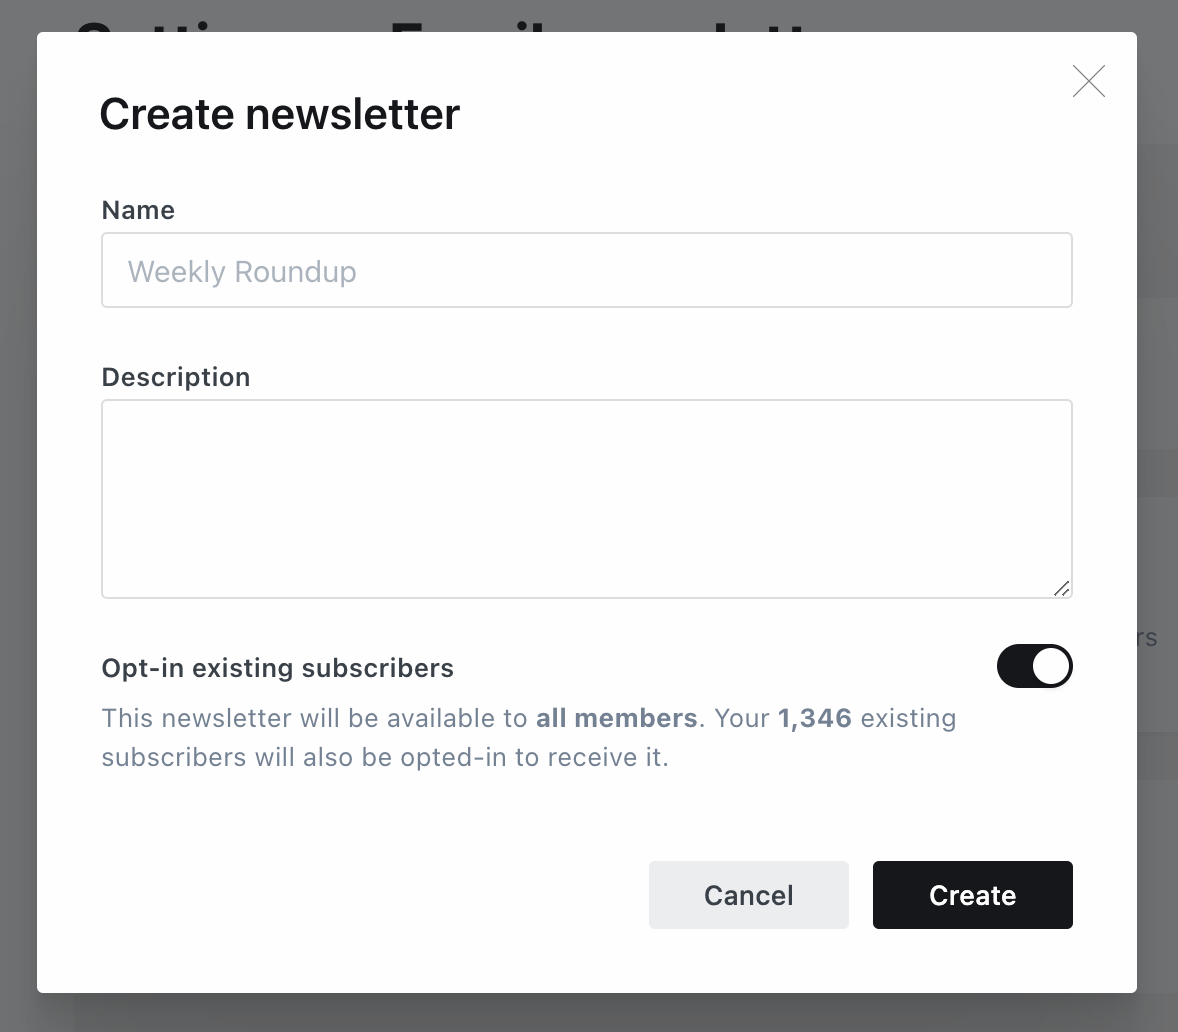 The create newsletter form